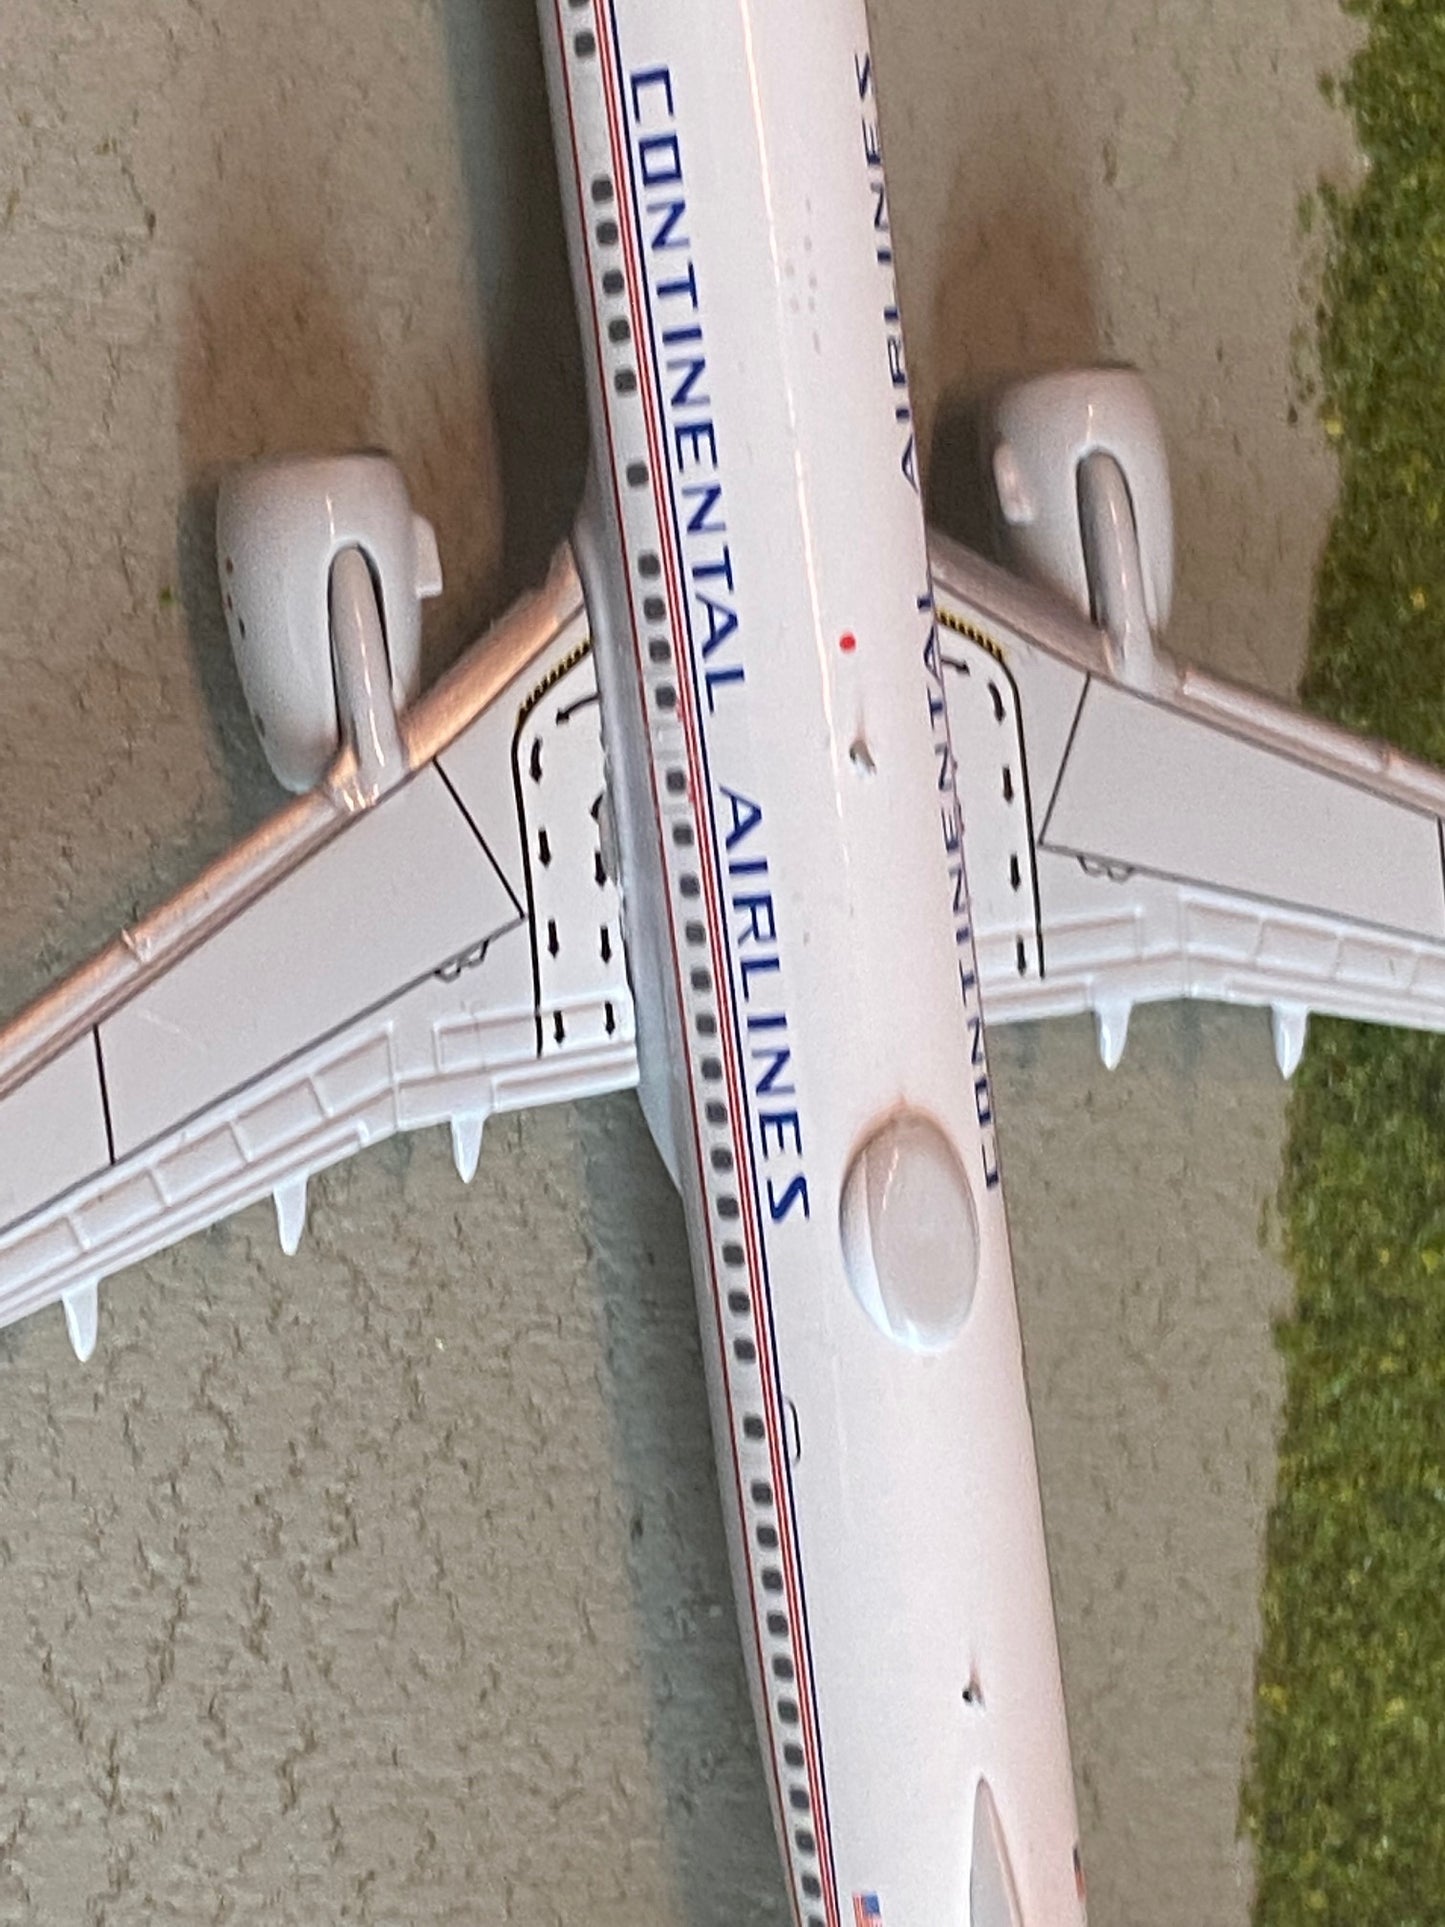 1/400 United Airlines B 737-900ER/w "Retro 75th Anniversary Livery" NG Models 79010 *Has paint chip on top of wing*